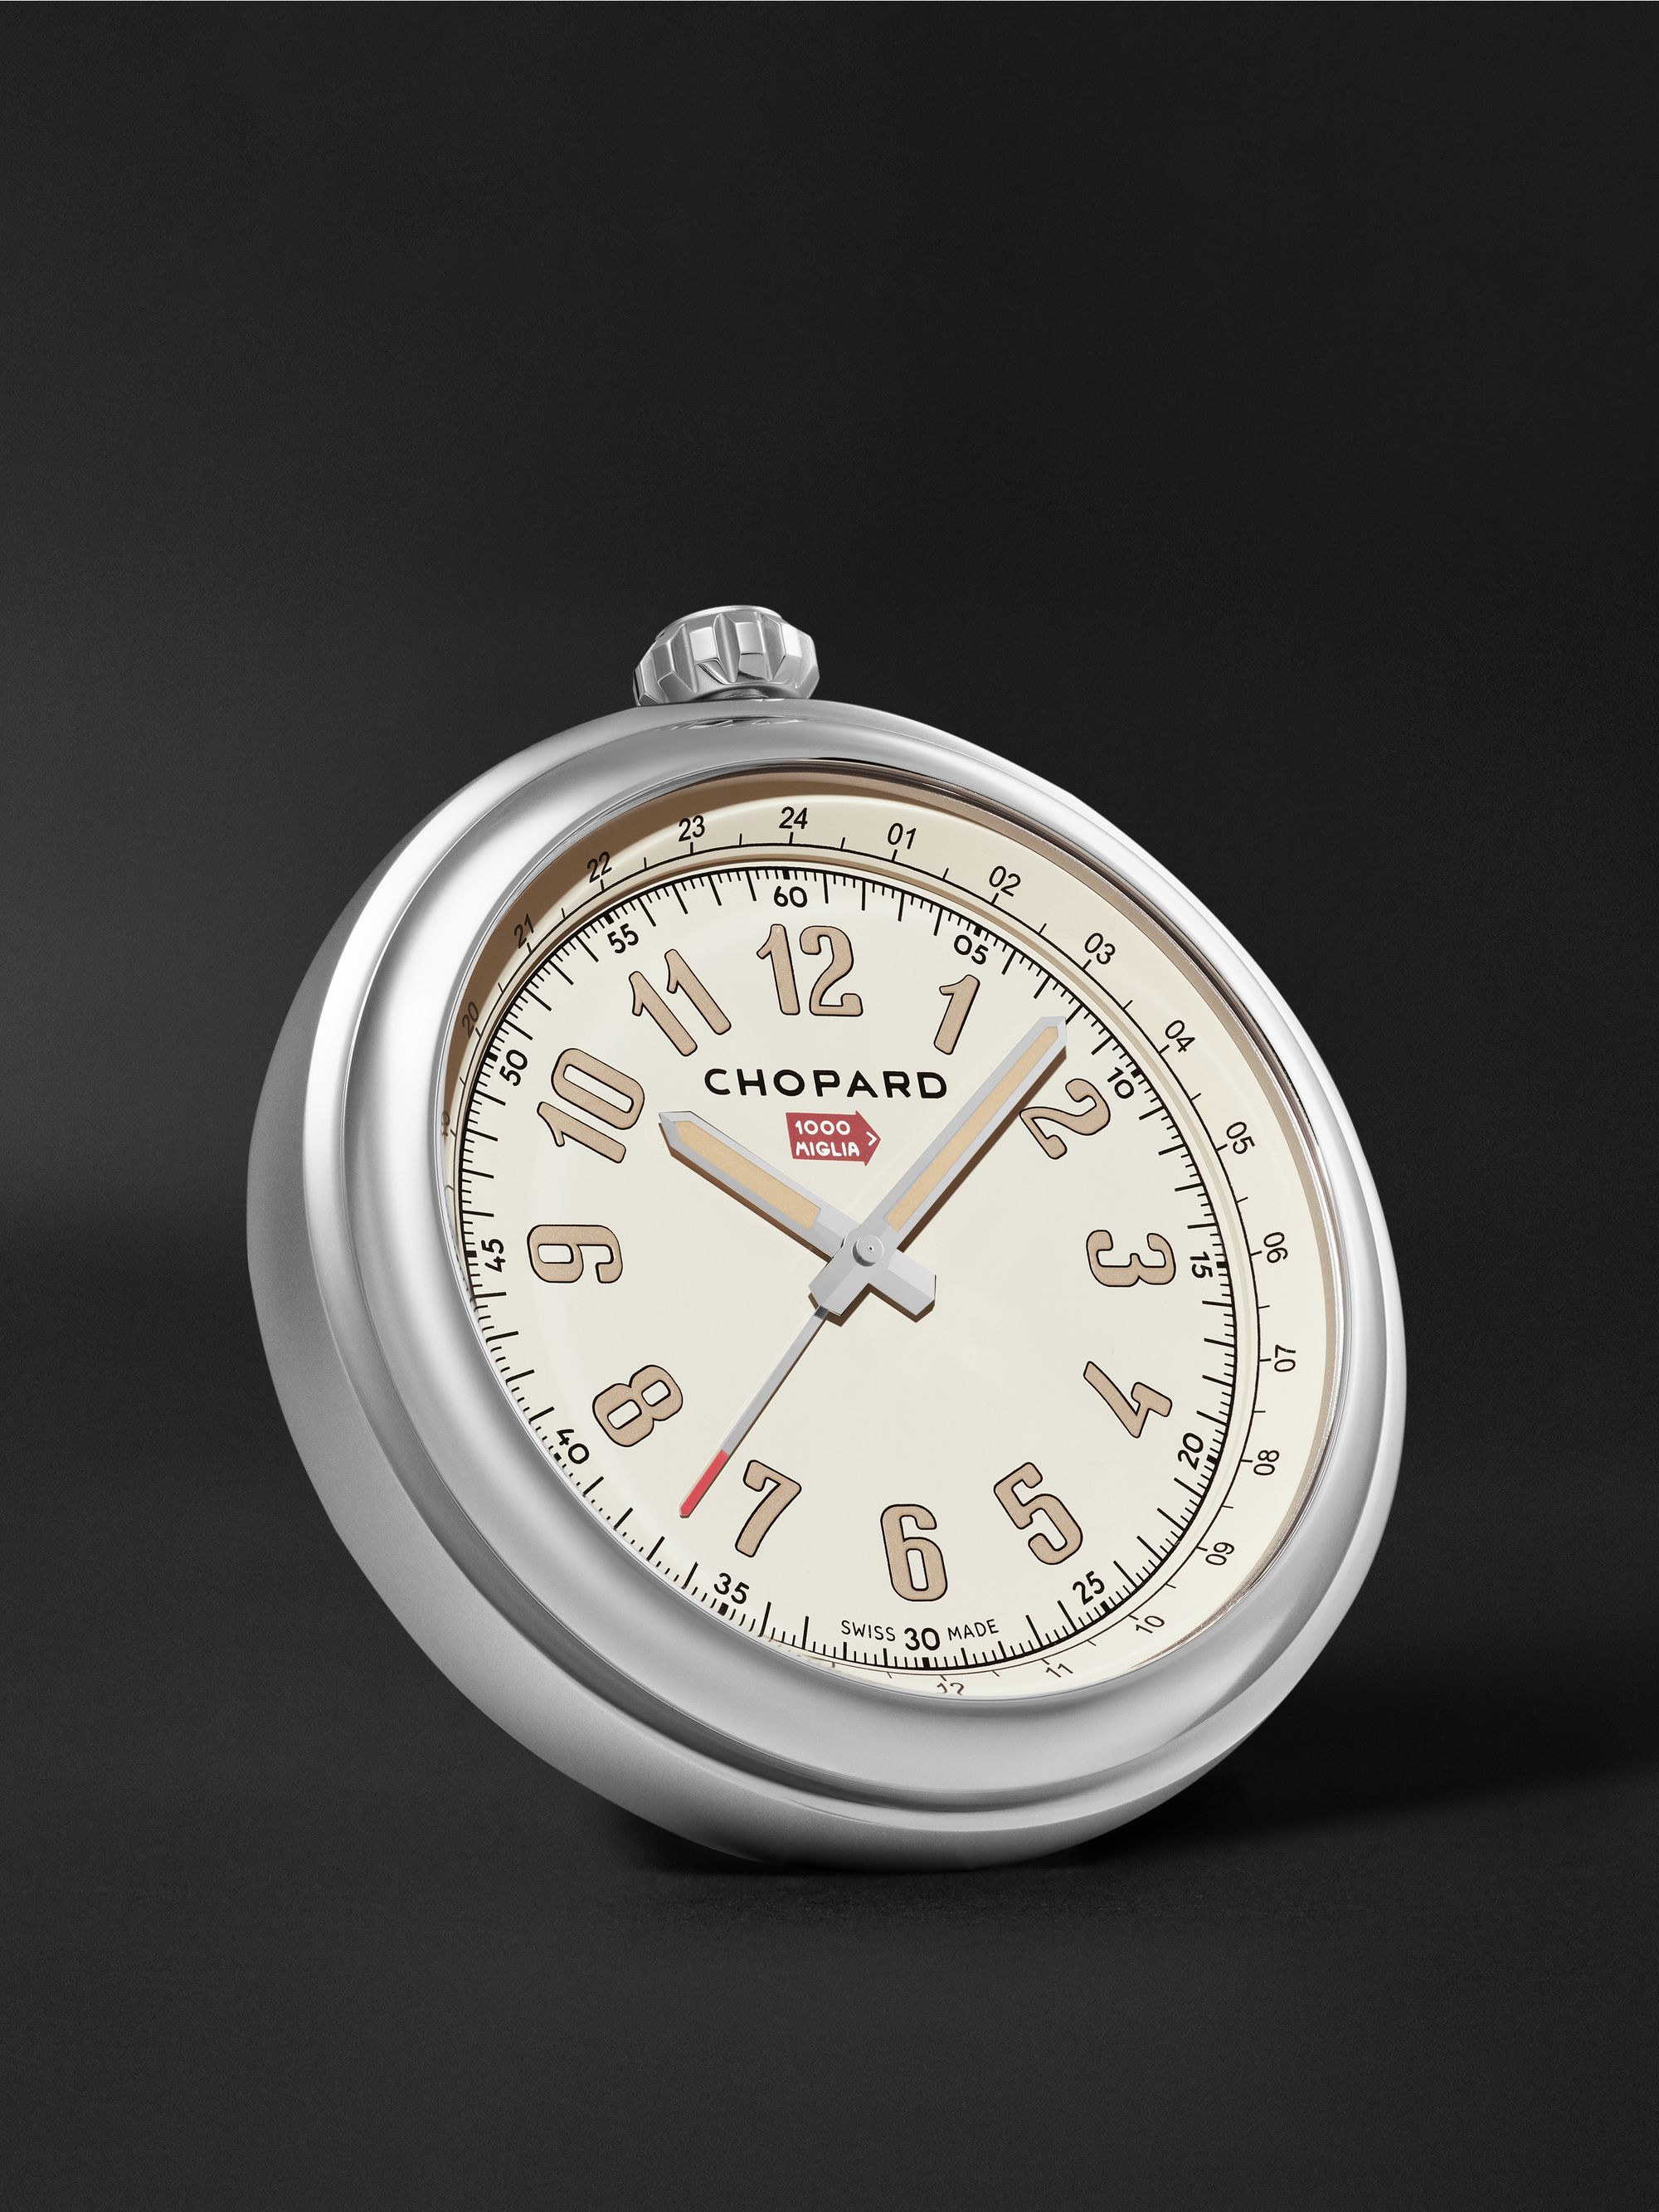 CHOPARD Classic Racing Silver Table Clock, Ref. No. 95020-0124